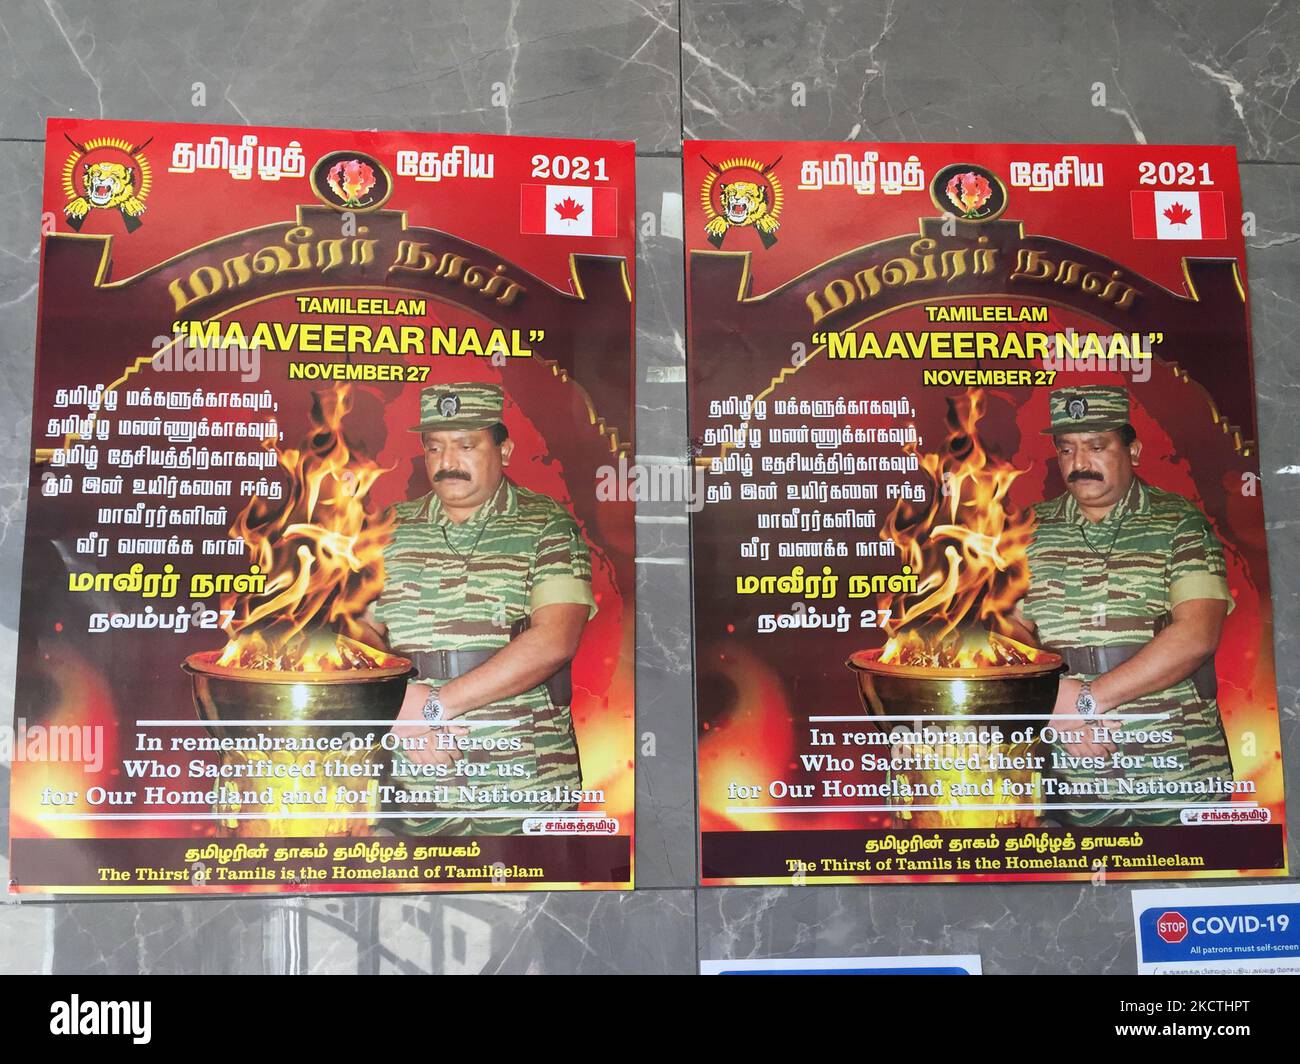 Posters with the image of Velupillai Prabhakaran (leader of the Tamil Tigers) seen for the upcoming Tamil Eelam Maaveerar Naal (Heroes Day) in Scarborough, Ontario, Canada, on November 07, 2021. Heroes Day celebrates members of the LTTE (Liberation Tigers of Tamil Eelam) who were killed while fighting during the Sri Lanka civil war. (Photo by Creative Touch Imaging Ltd./NurPhoto) Stock Photo